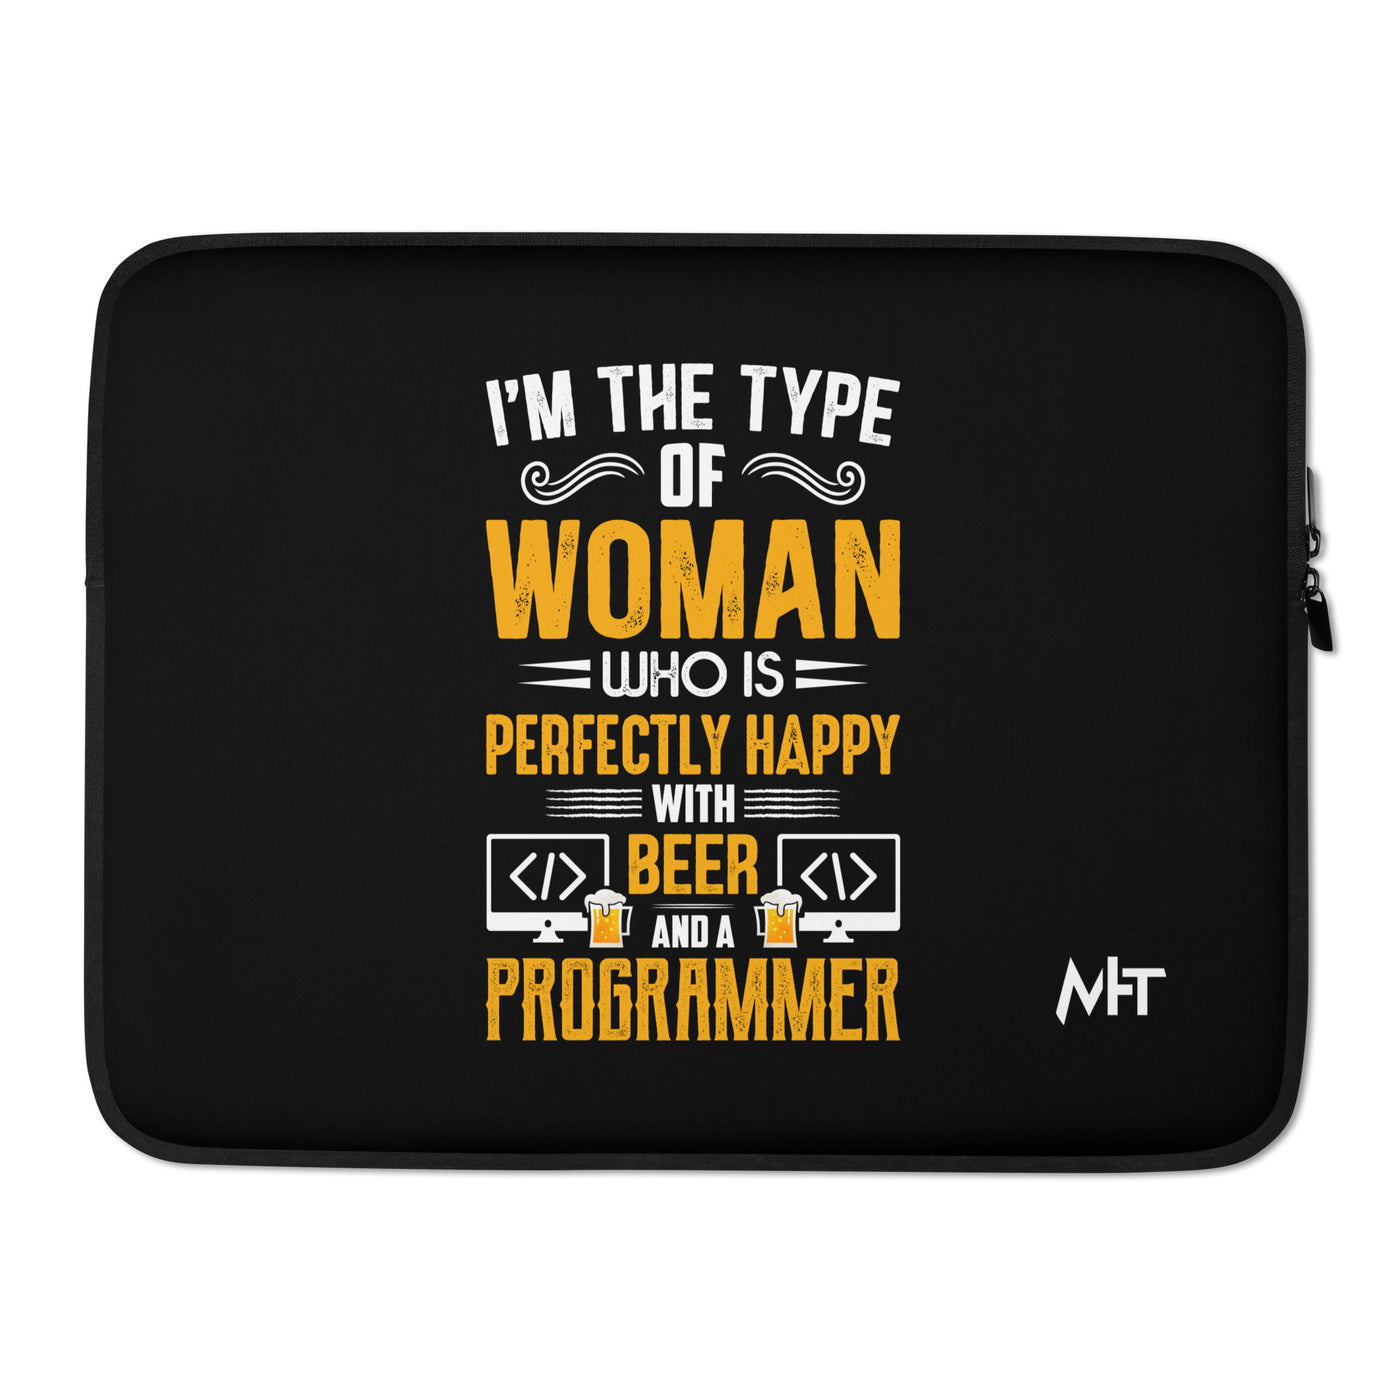 I am the Type of Woman who is perfectly happy with Beer and a Programmer - Laptop Sleeve